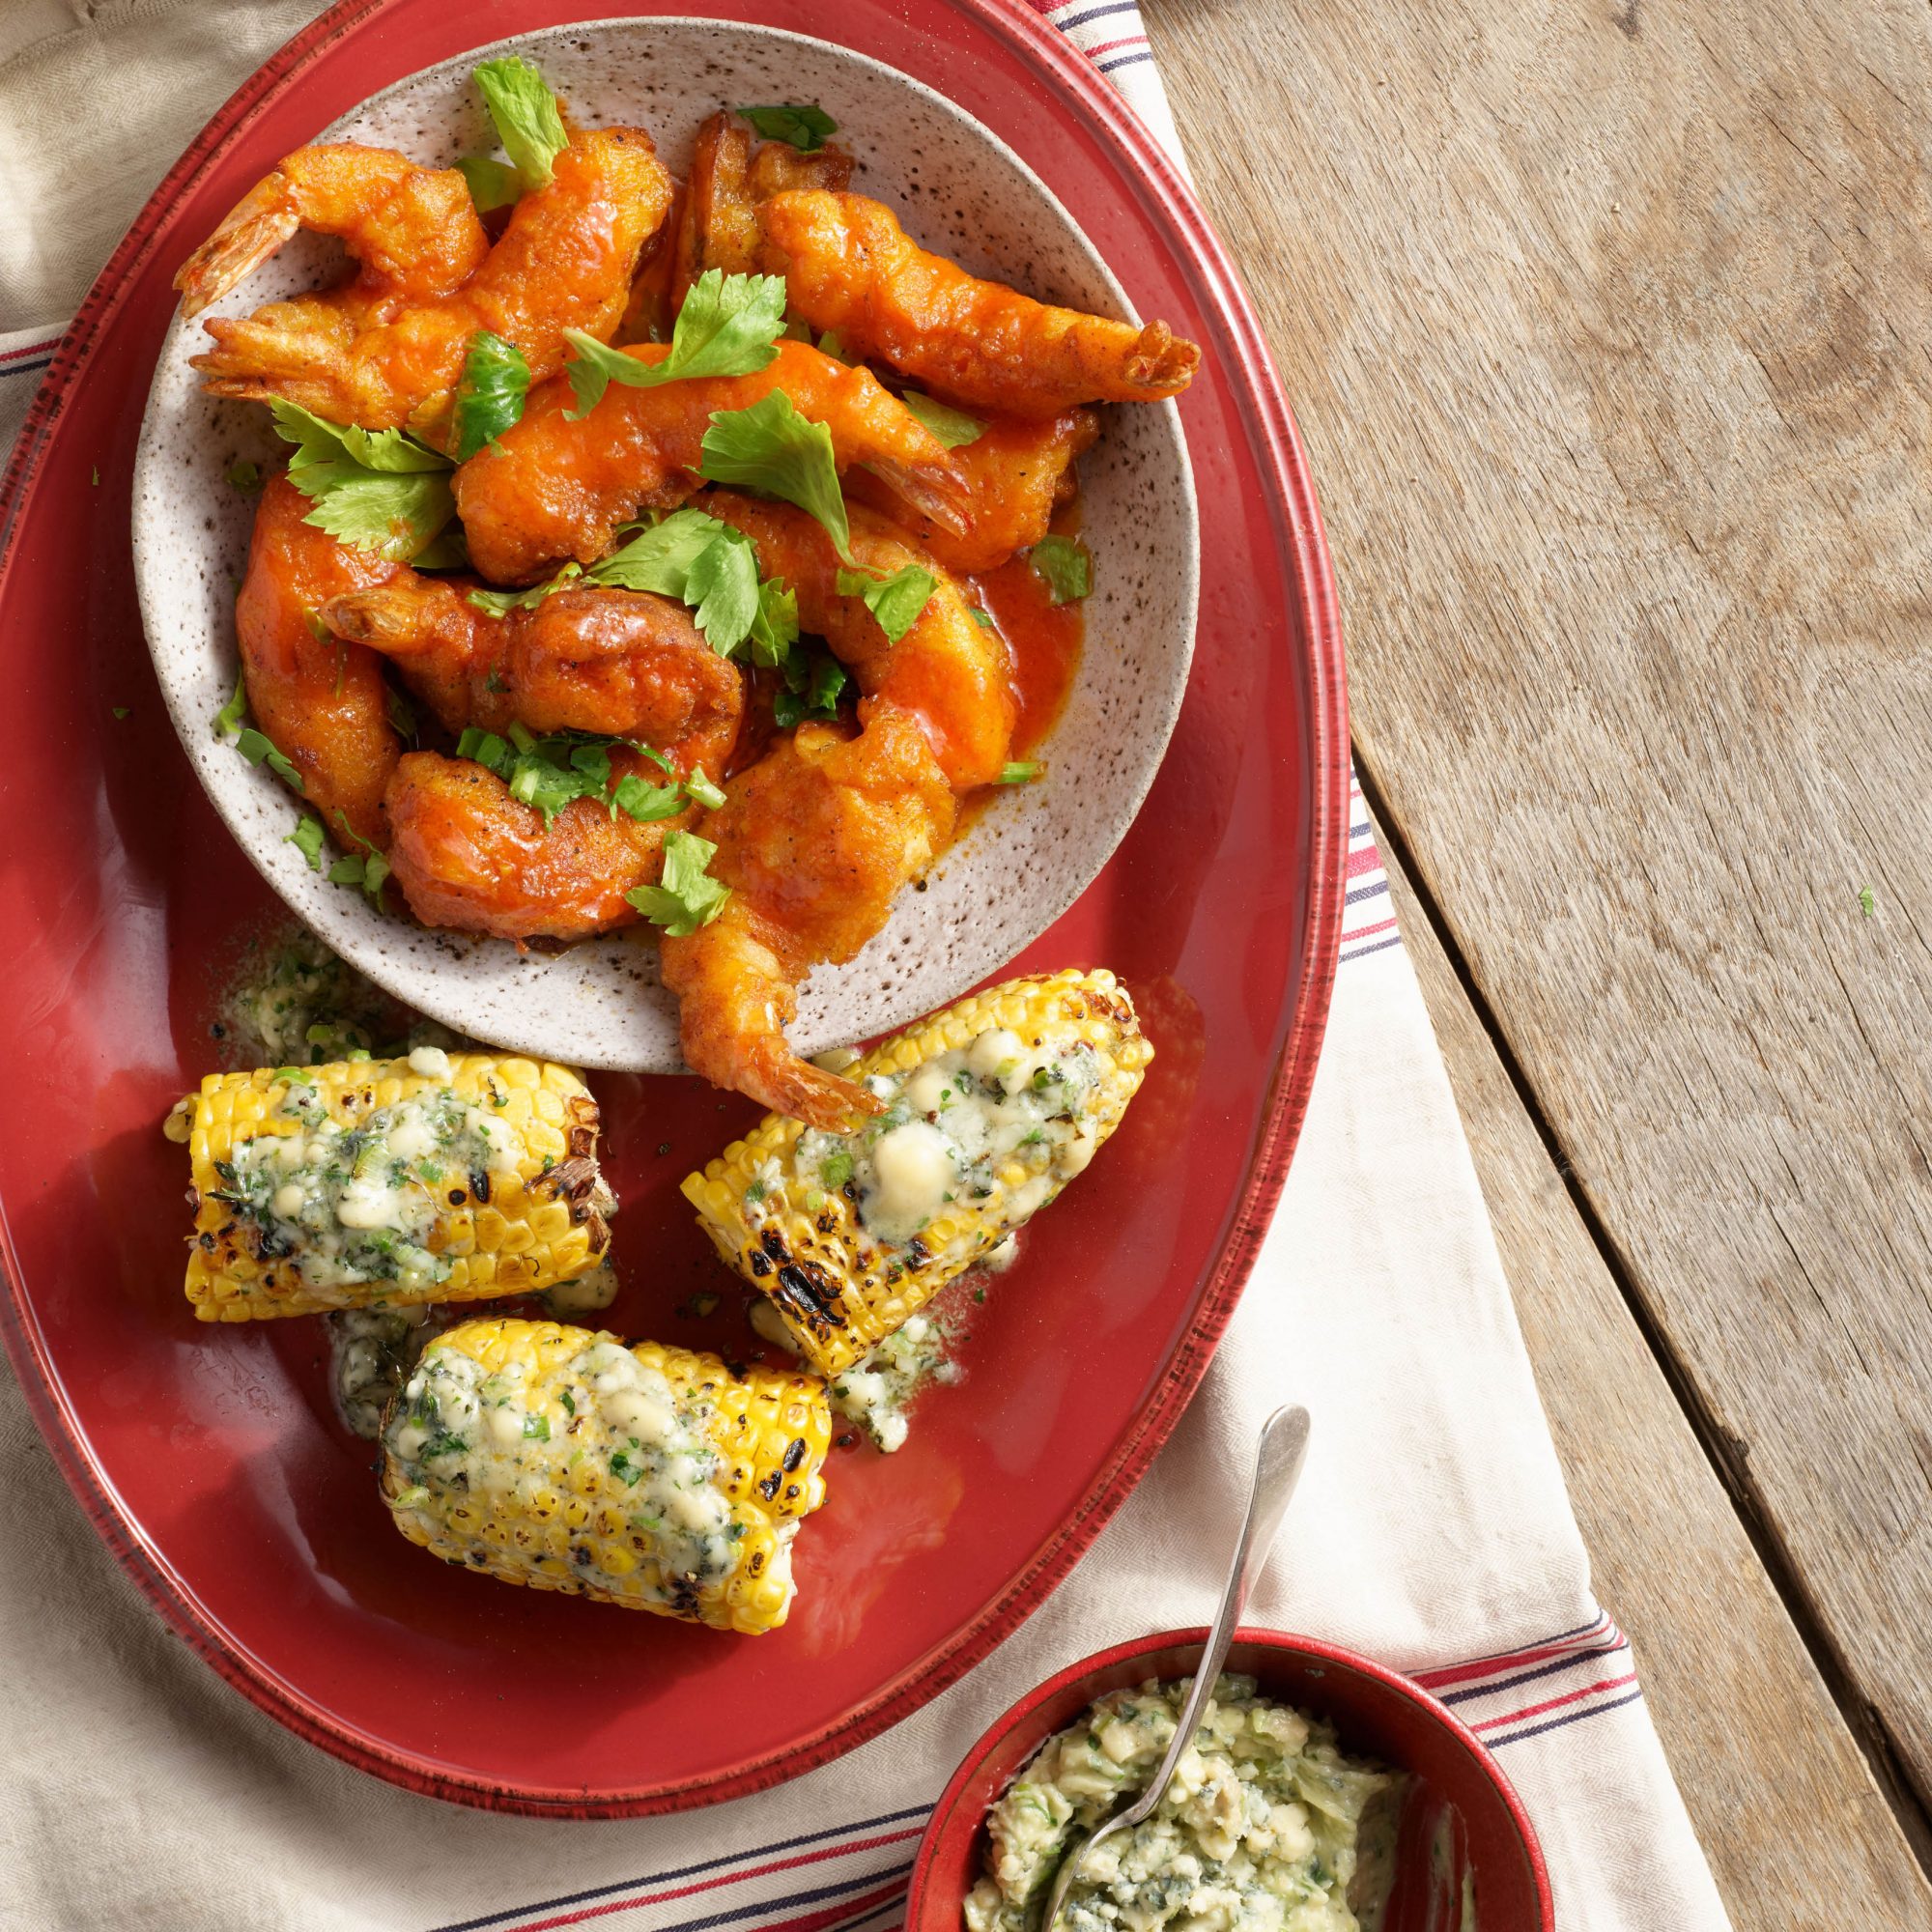 Rachael Ray's Boilermaker Buffalo Shrimp & Corn on the Cob with Blue Cheese Butter